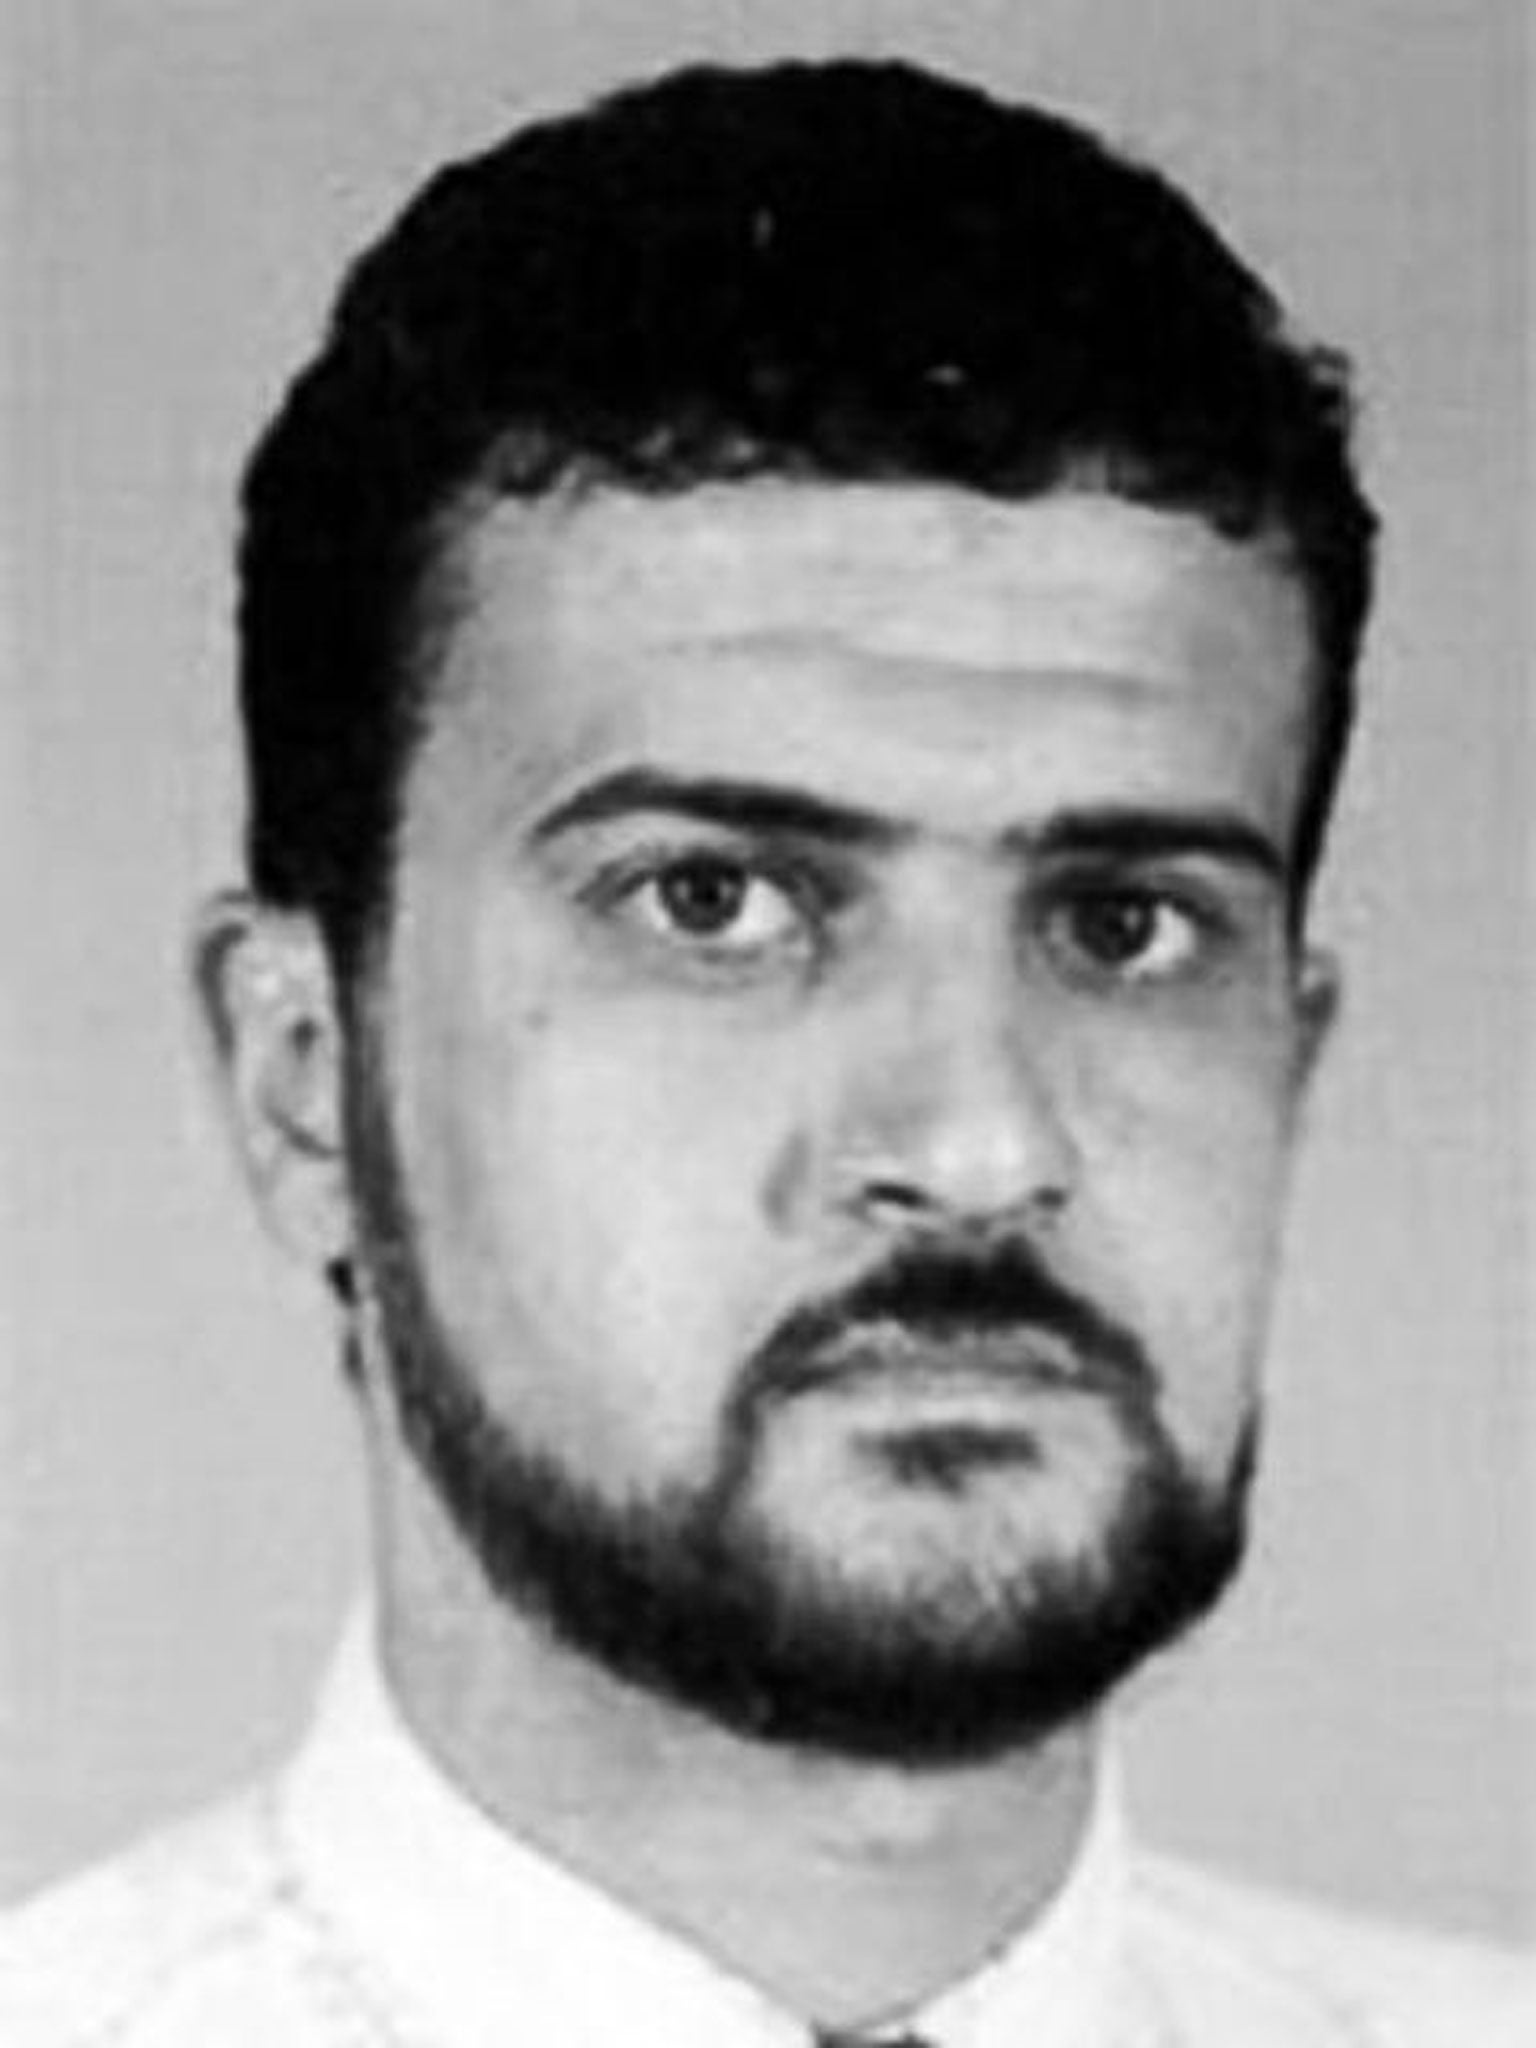 Abu Anas al-Liby was seized by a US Army Delta Force squad on the streets of Tripoli on 5 October